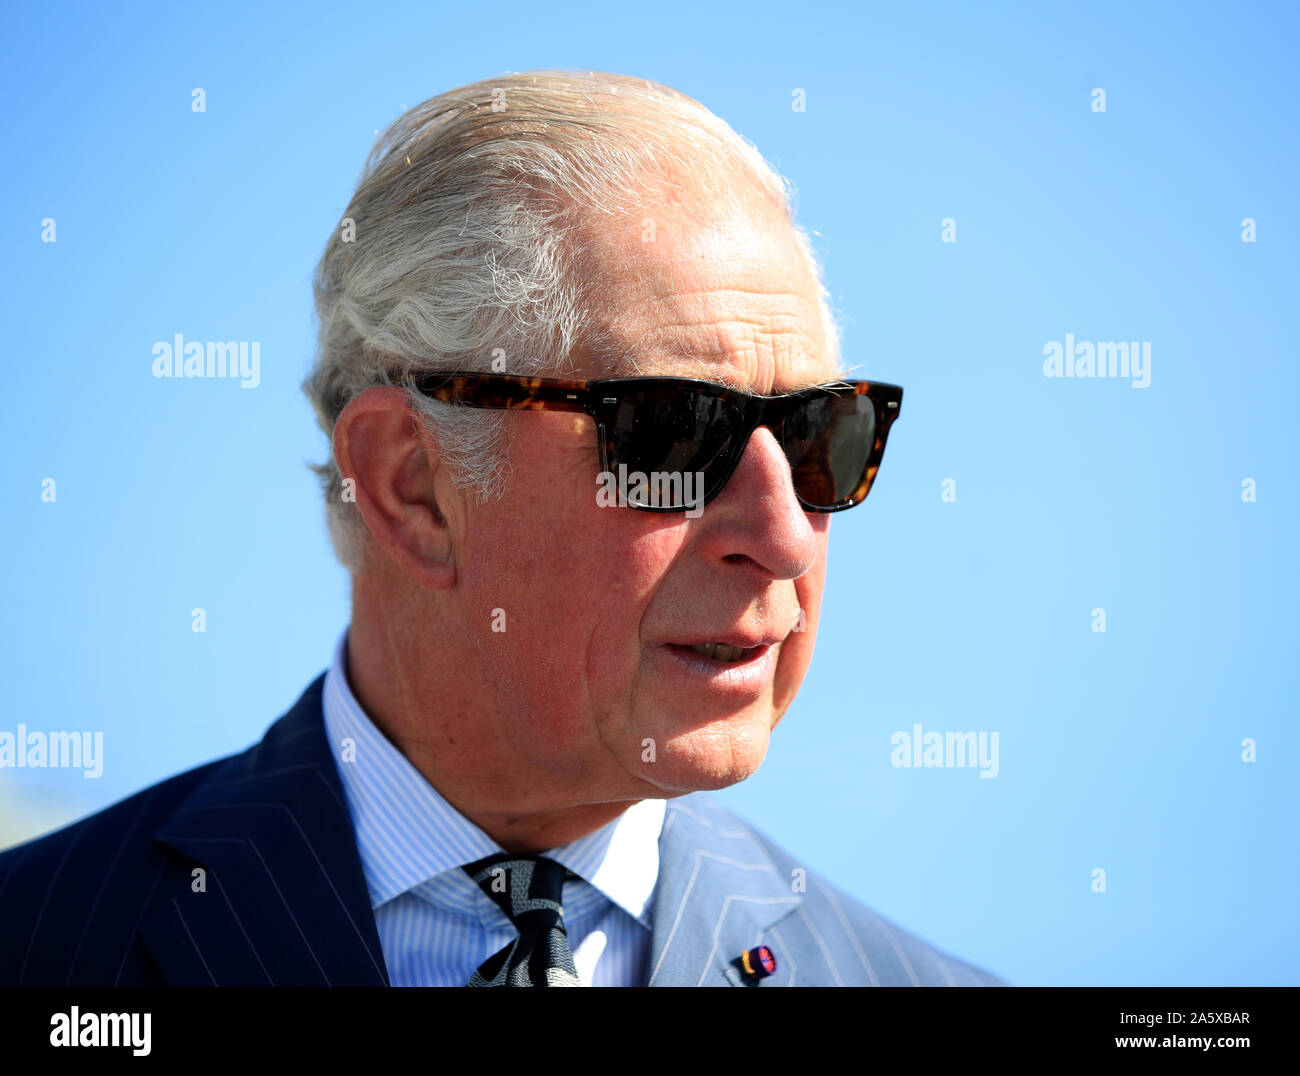 The Prince of Wales during a visit to HMS Enterprise, which is moored at Harumi Pier in Tokyo, Japan. Stock Photo